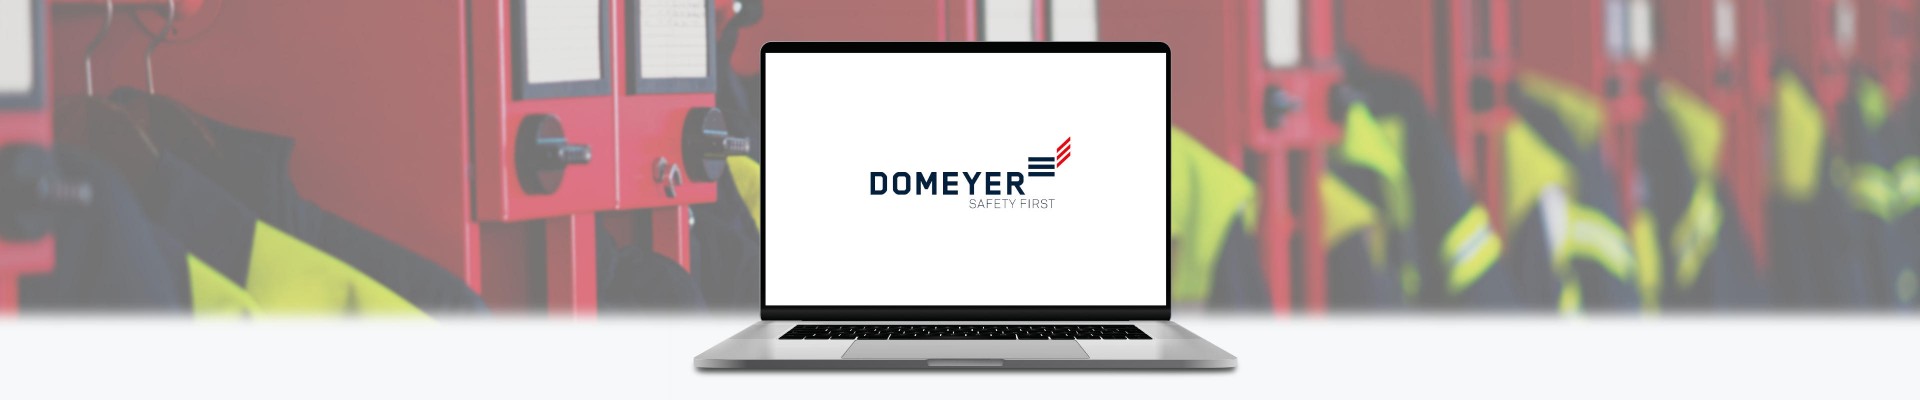 Domeyer protective clothing